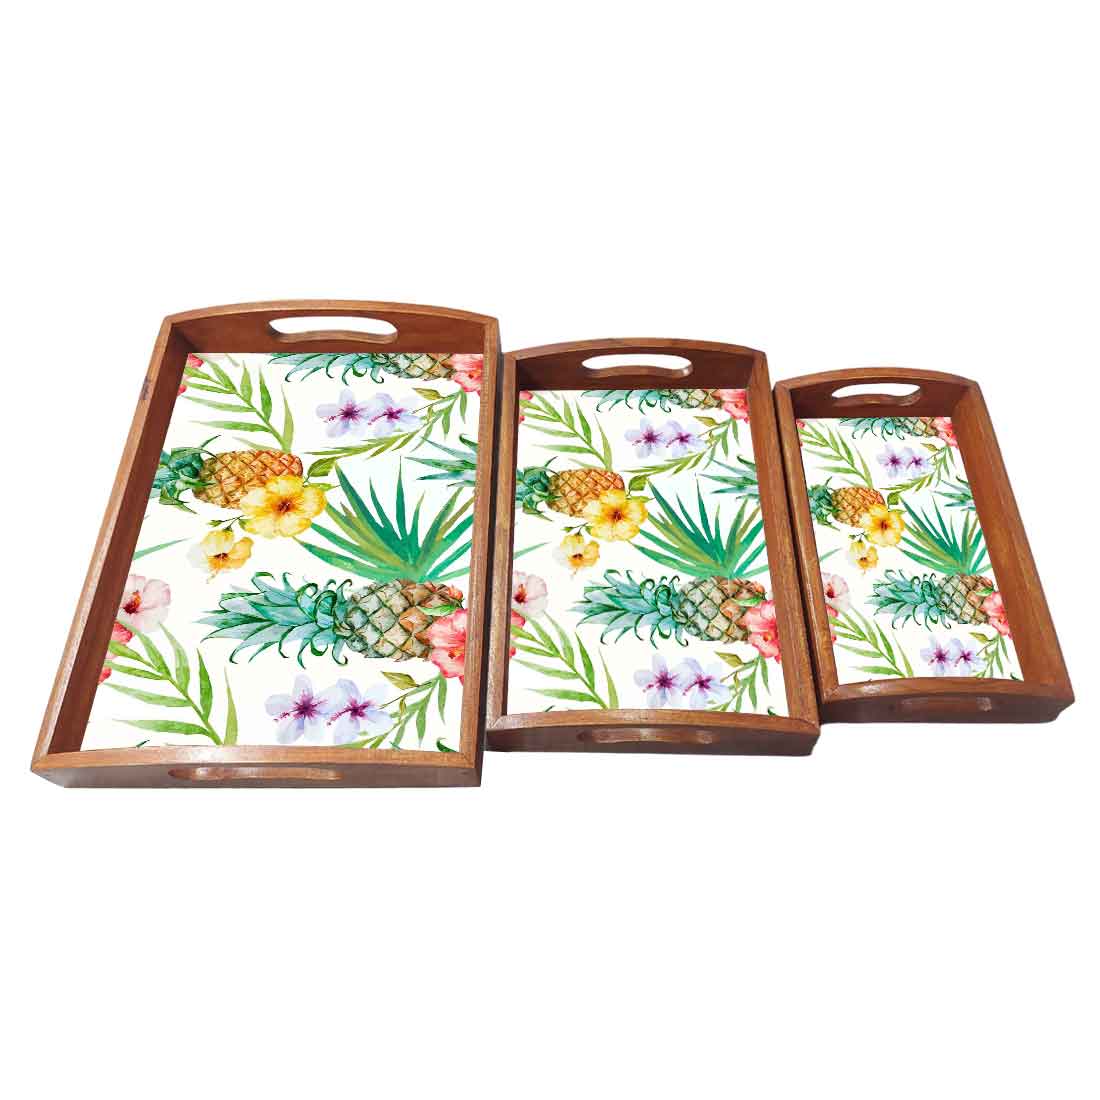 Wooden Tray Service with Handle Set of 3 Designer Trays - Pineapple